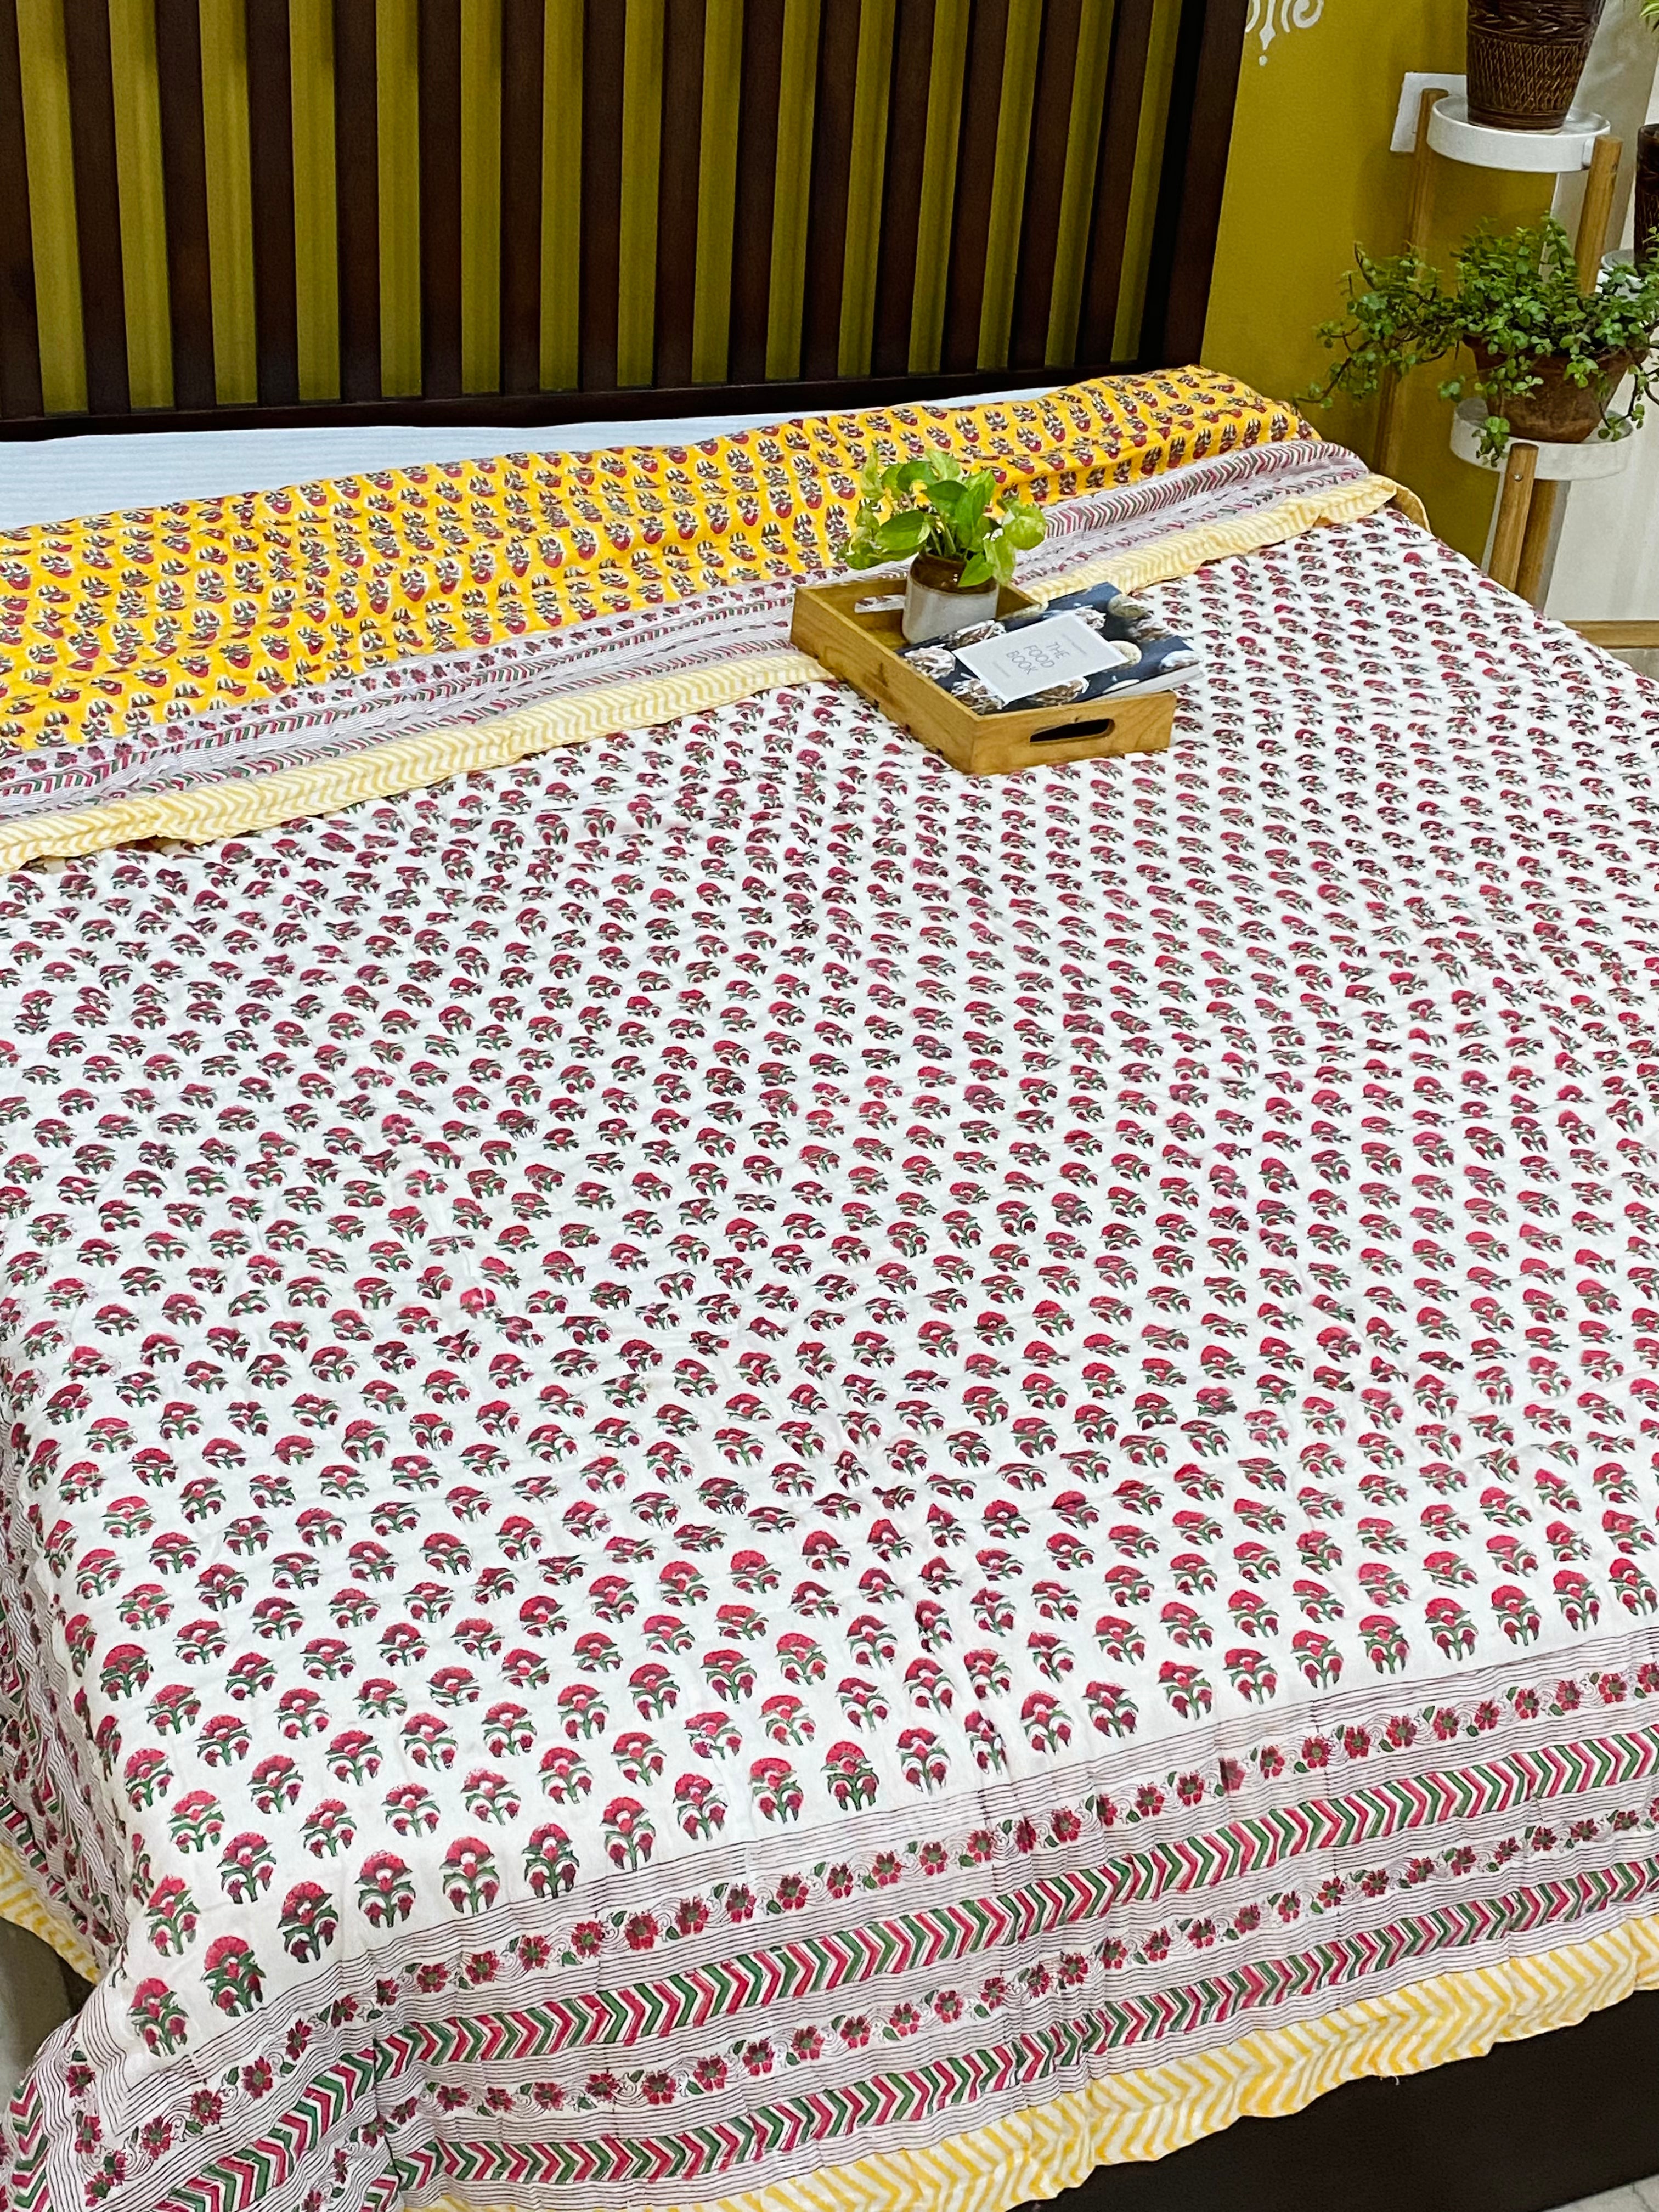 HandBlock Printed Mulmul Reversible Quilt- King Size (108*108 inches)